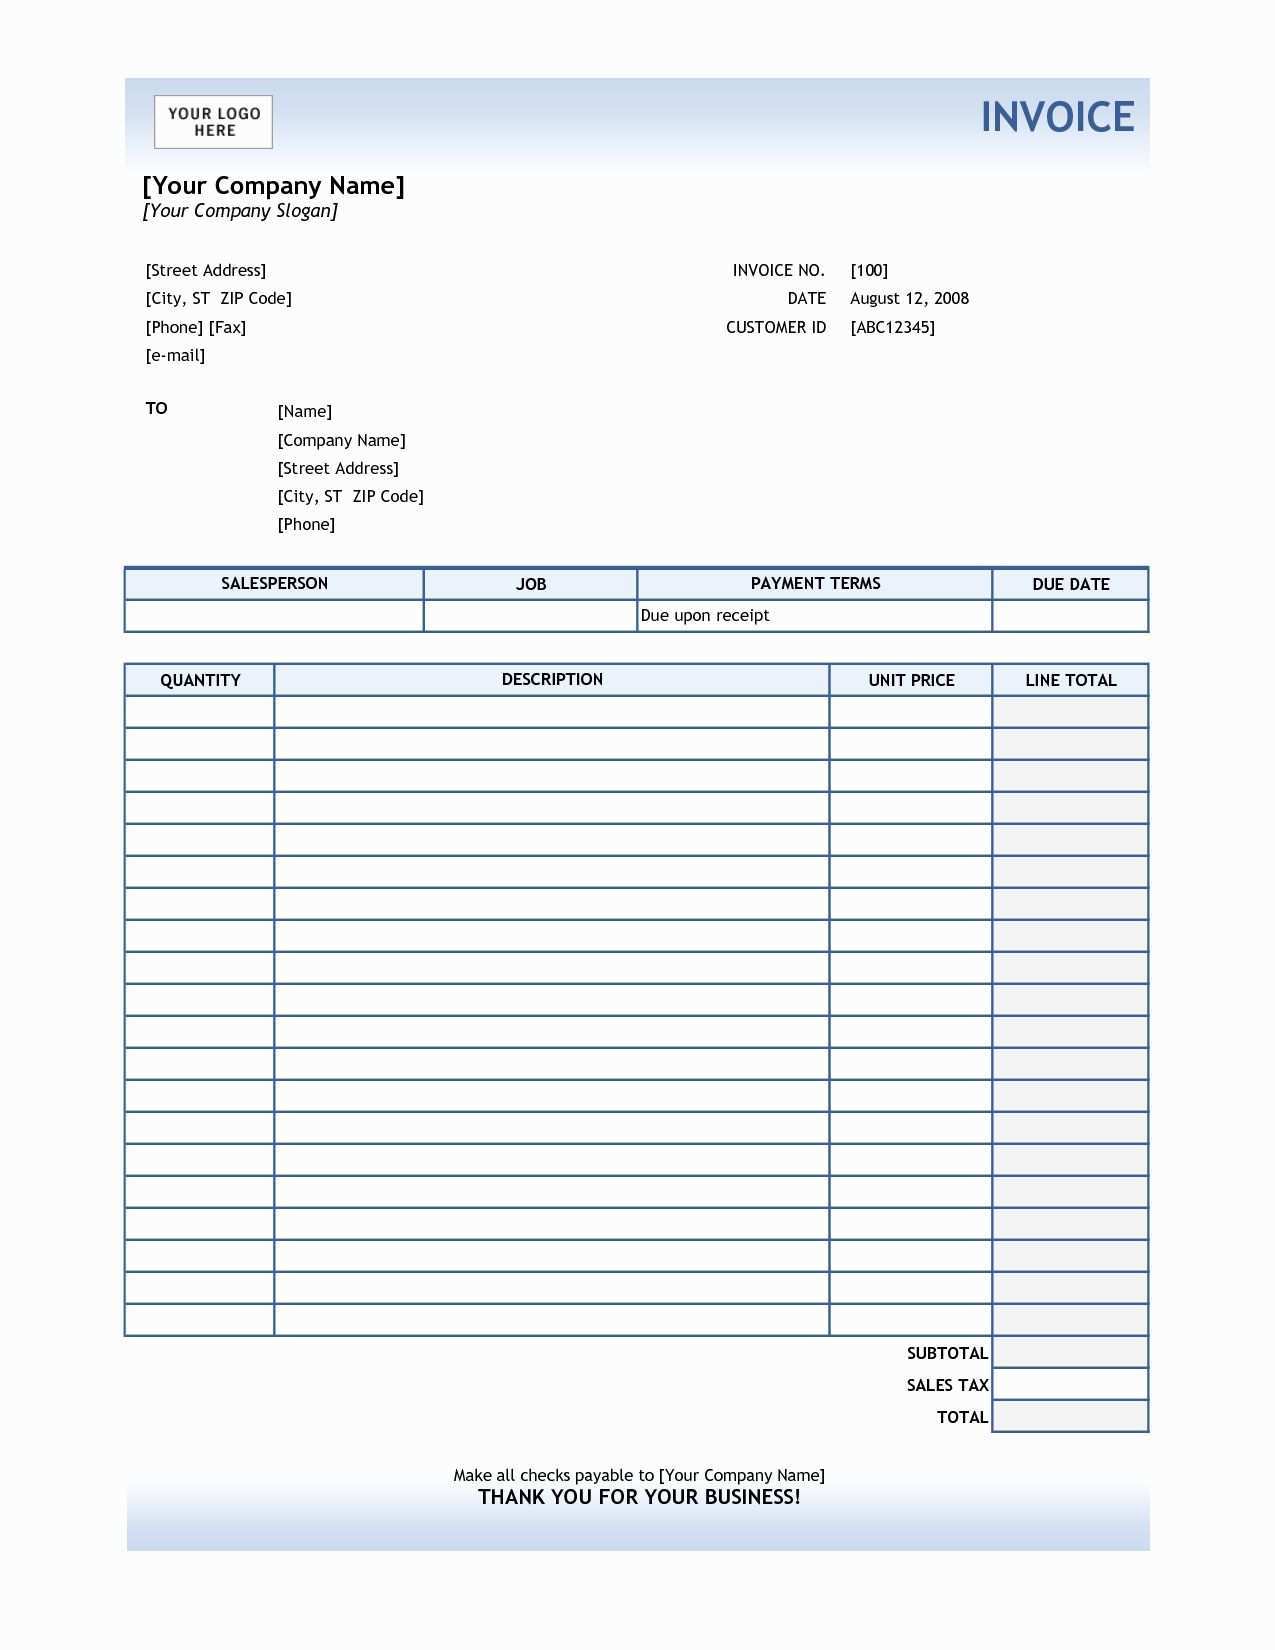 Billing Invoice Template Free Beautiful Service Invoice Template Excel In 2020 Invoice Template Invoice Layout Printable Invoice